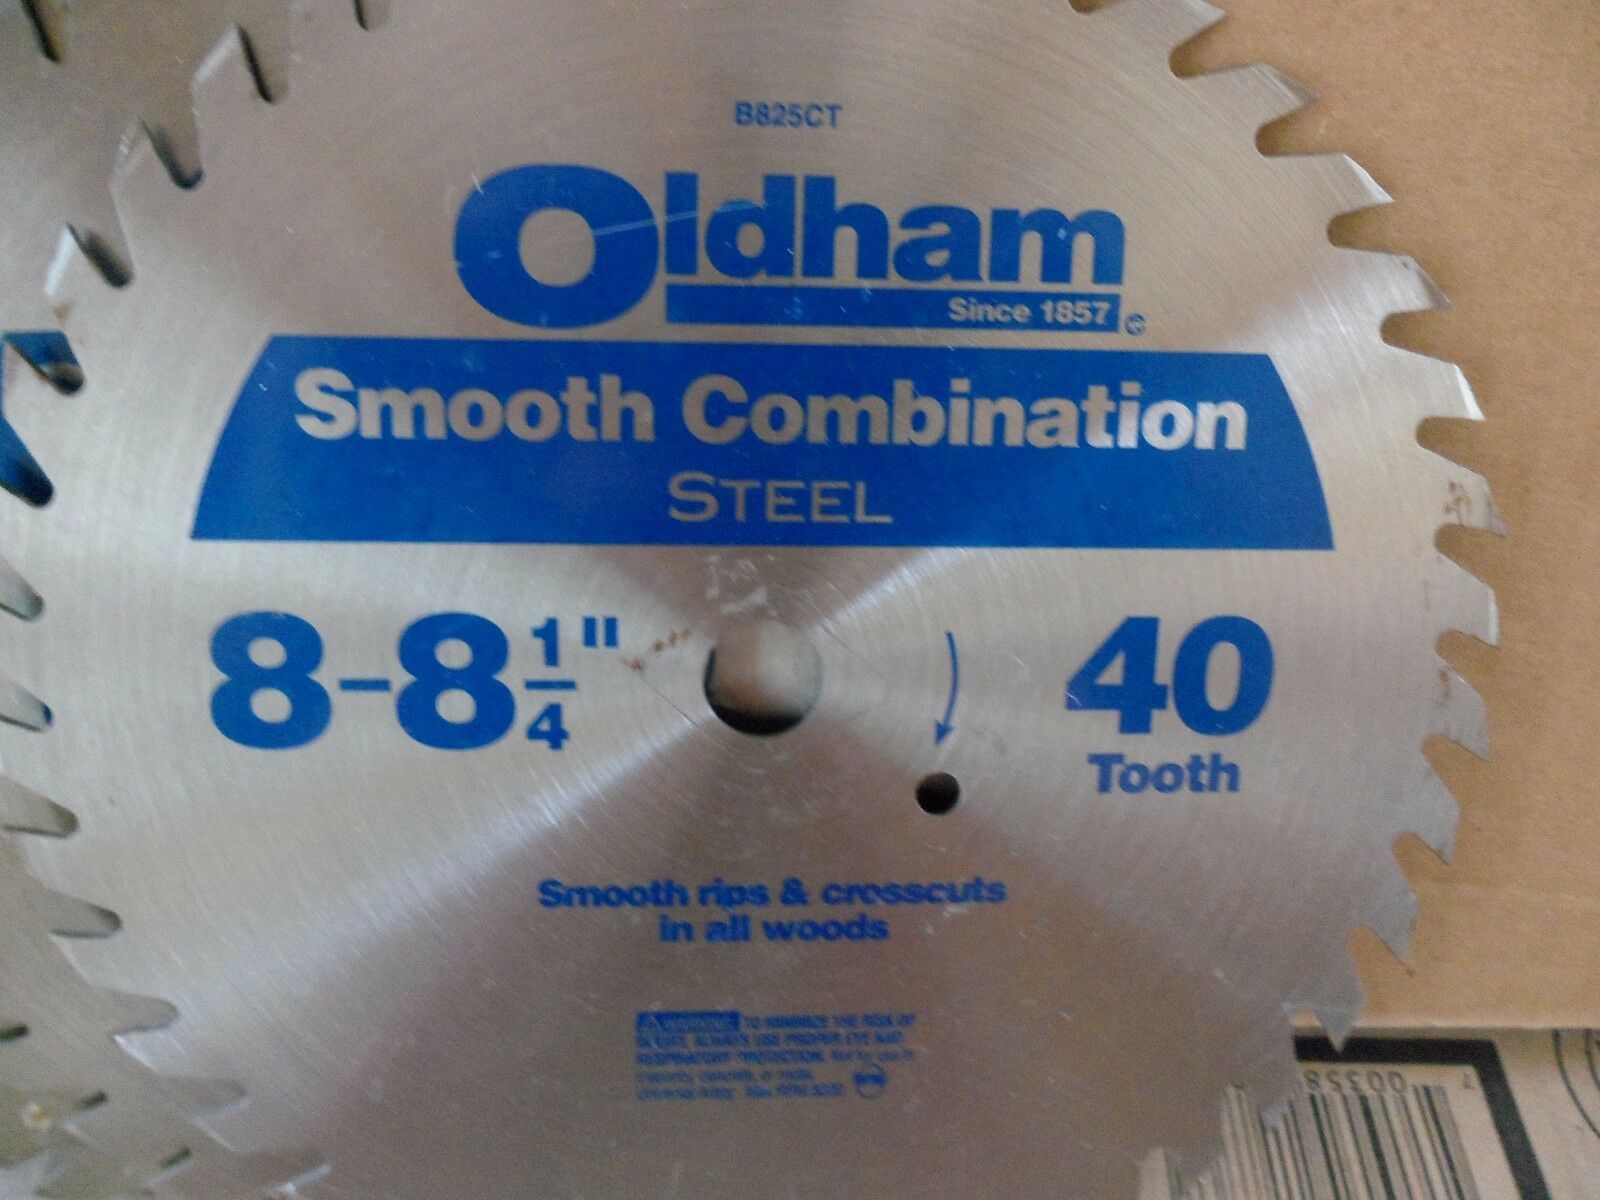 oldham 40 tooth 8" smooth combination saw blade steel - $4.95